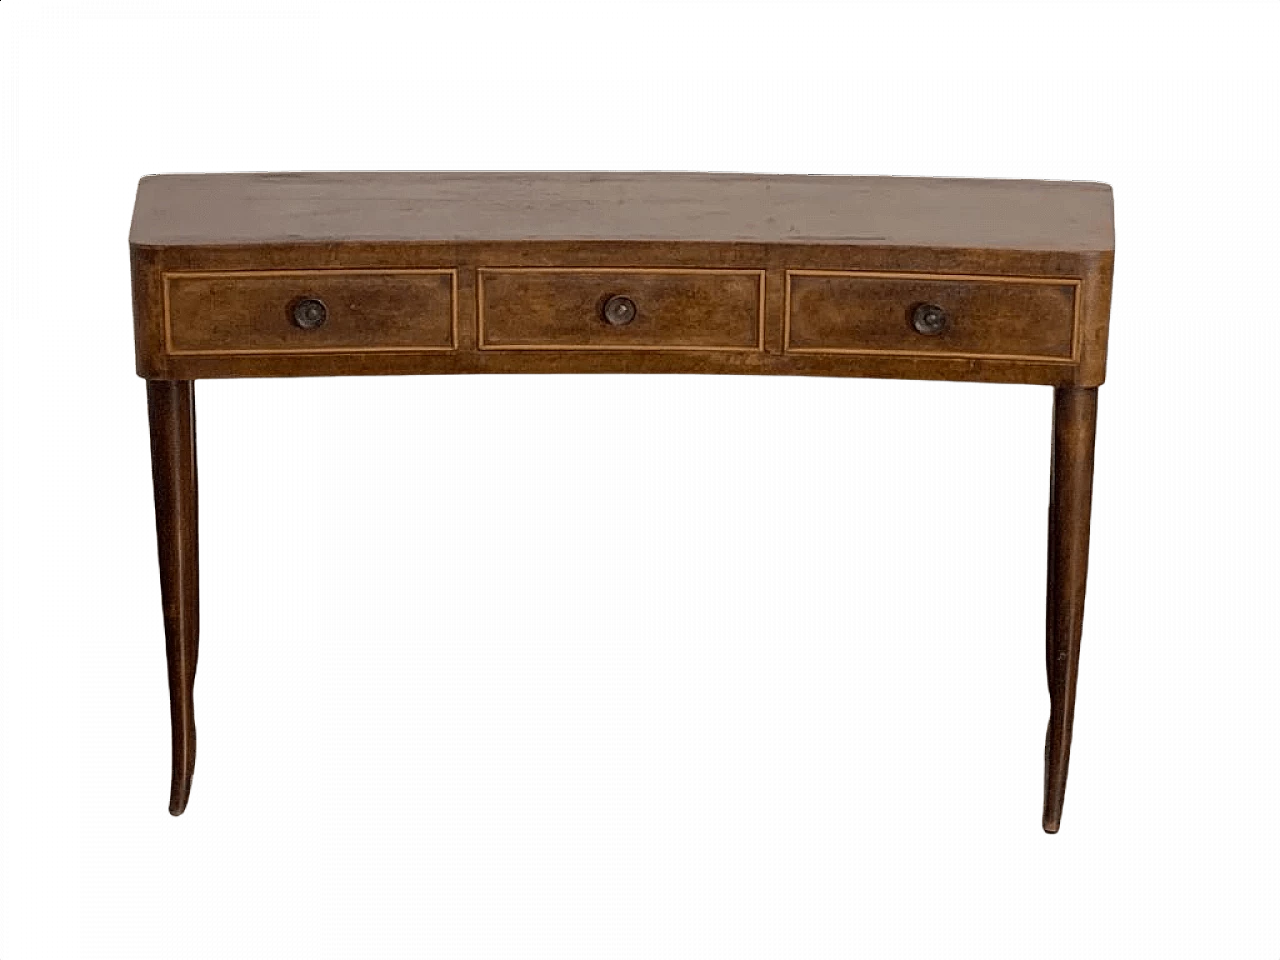 Curved walnut writing desk with bronze knobs, 1930s 1350376